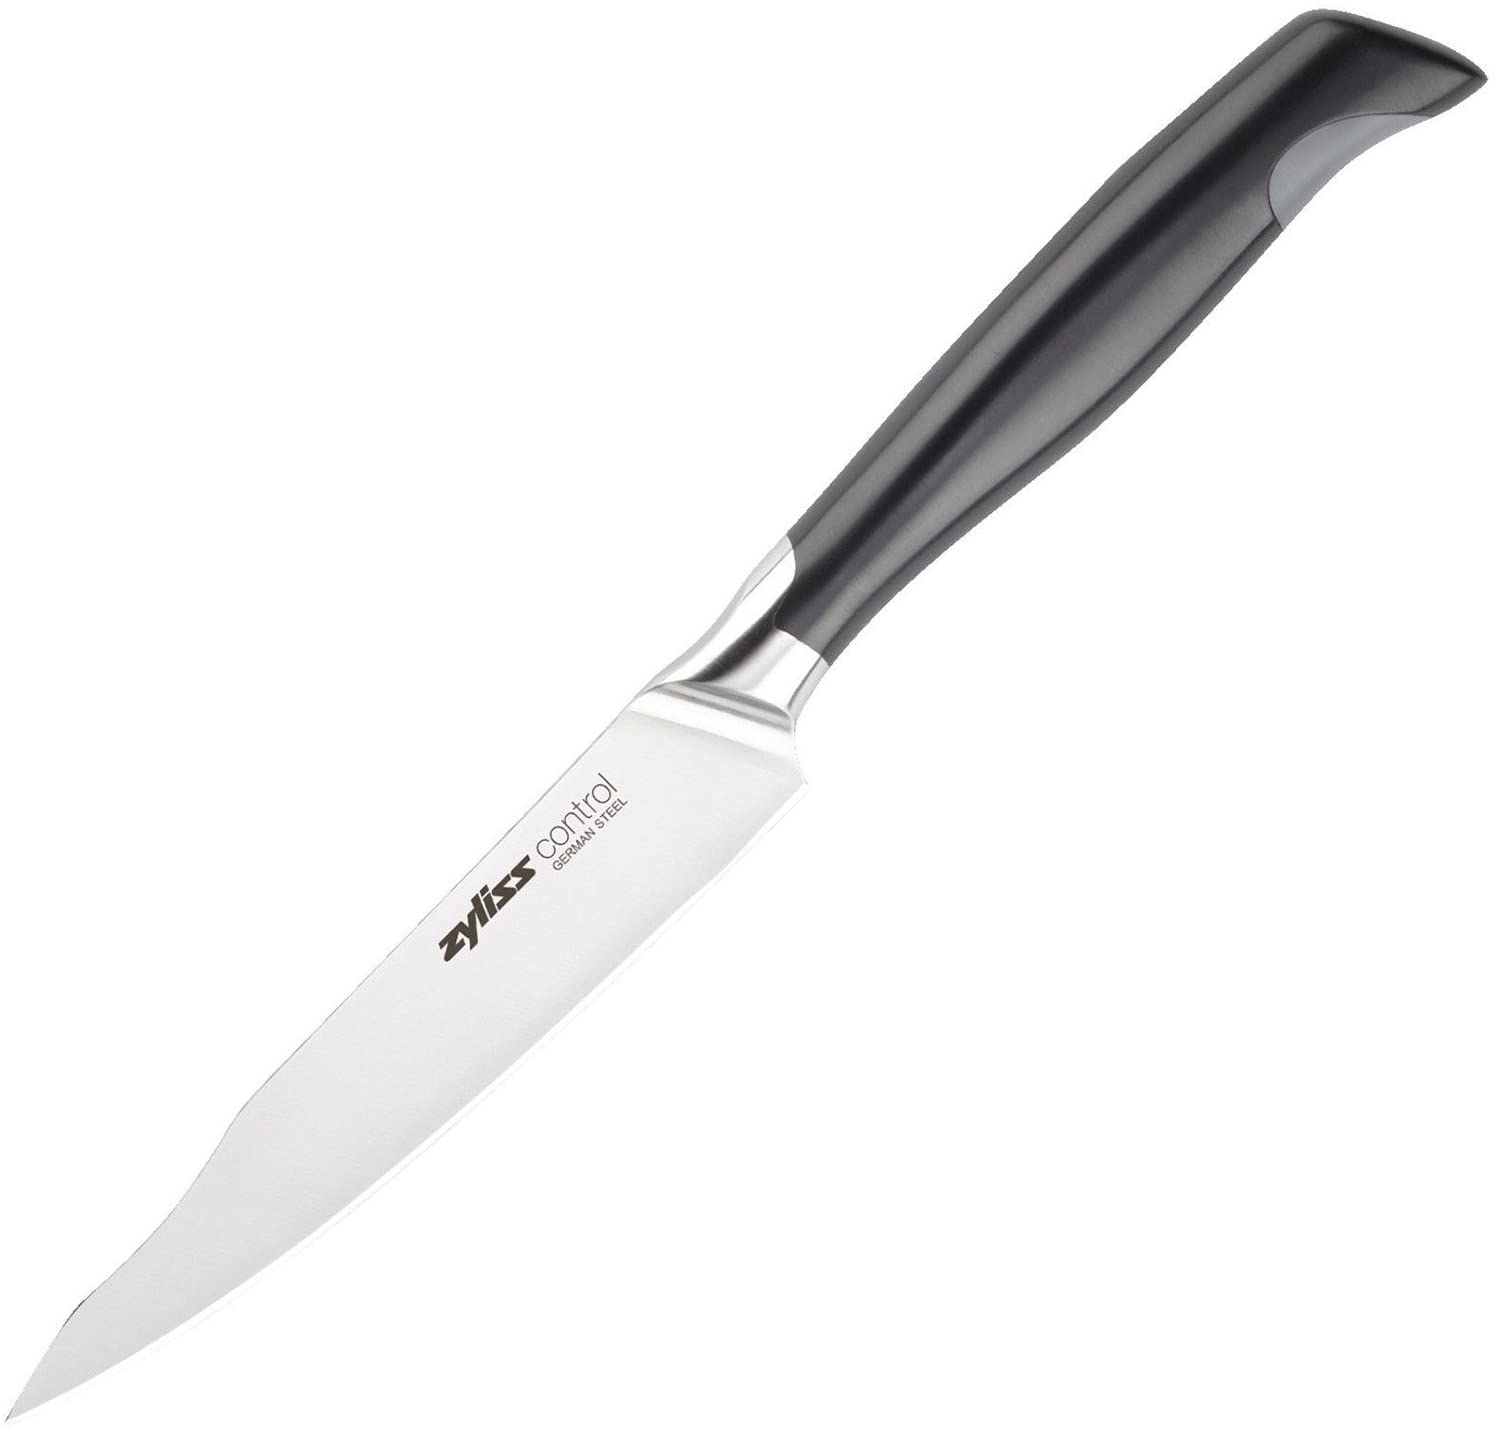 Zyliss E920174 \"Control\" vegetable and fruit knife, 11.5 cm knife, stainless steel, black, 20 x 5 x 0.5 cm